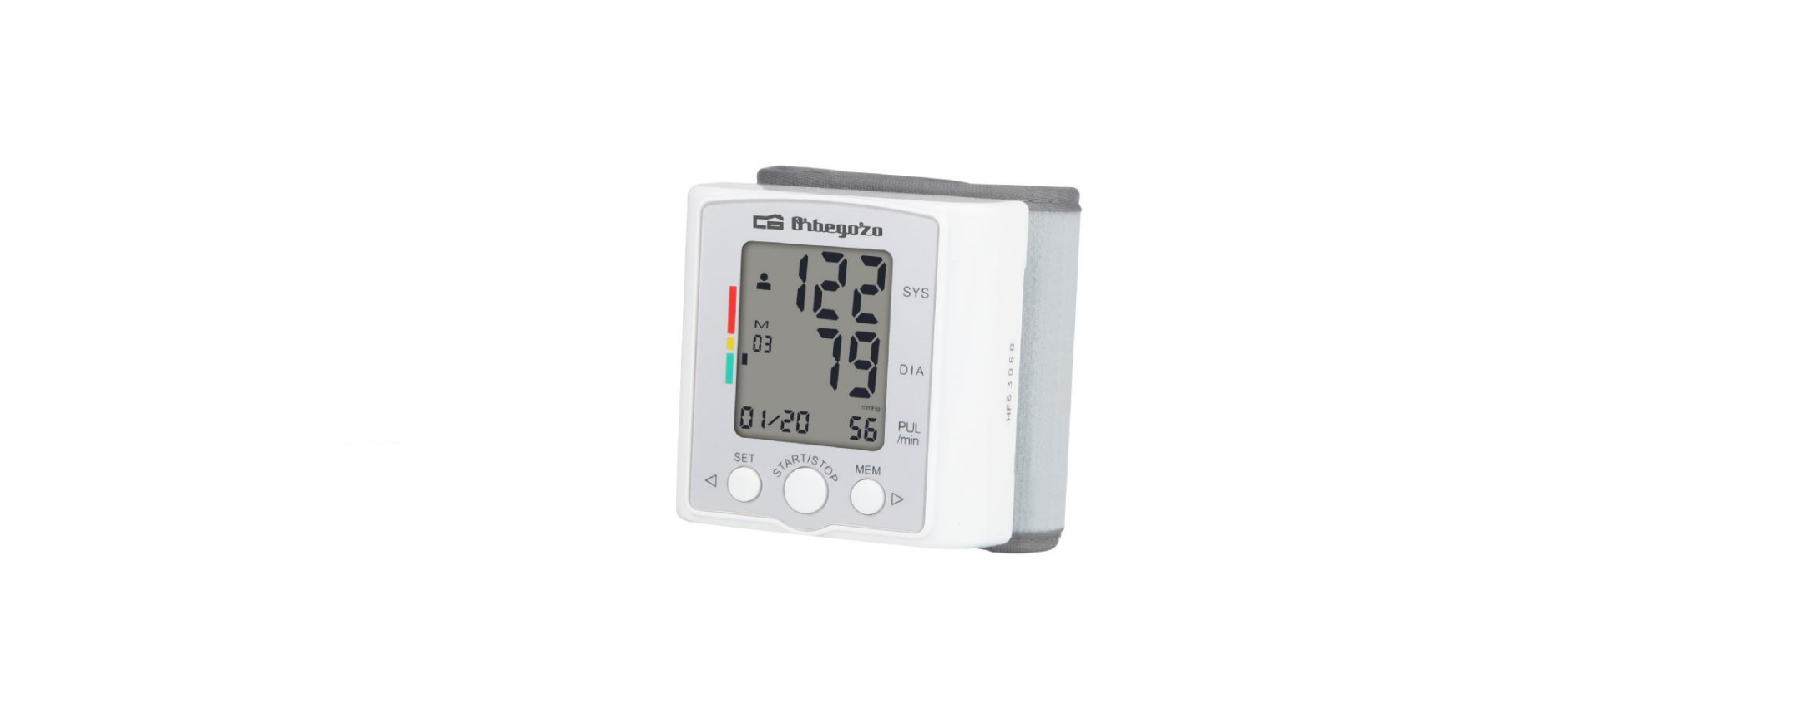 You are currently viewing Orbegozo TES 3650 Blood Pressure Monitor User Manual